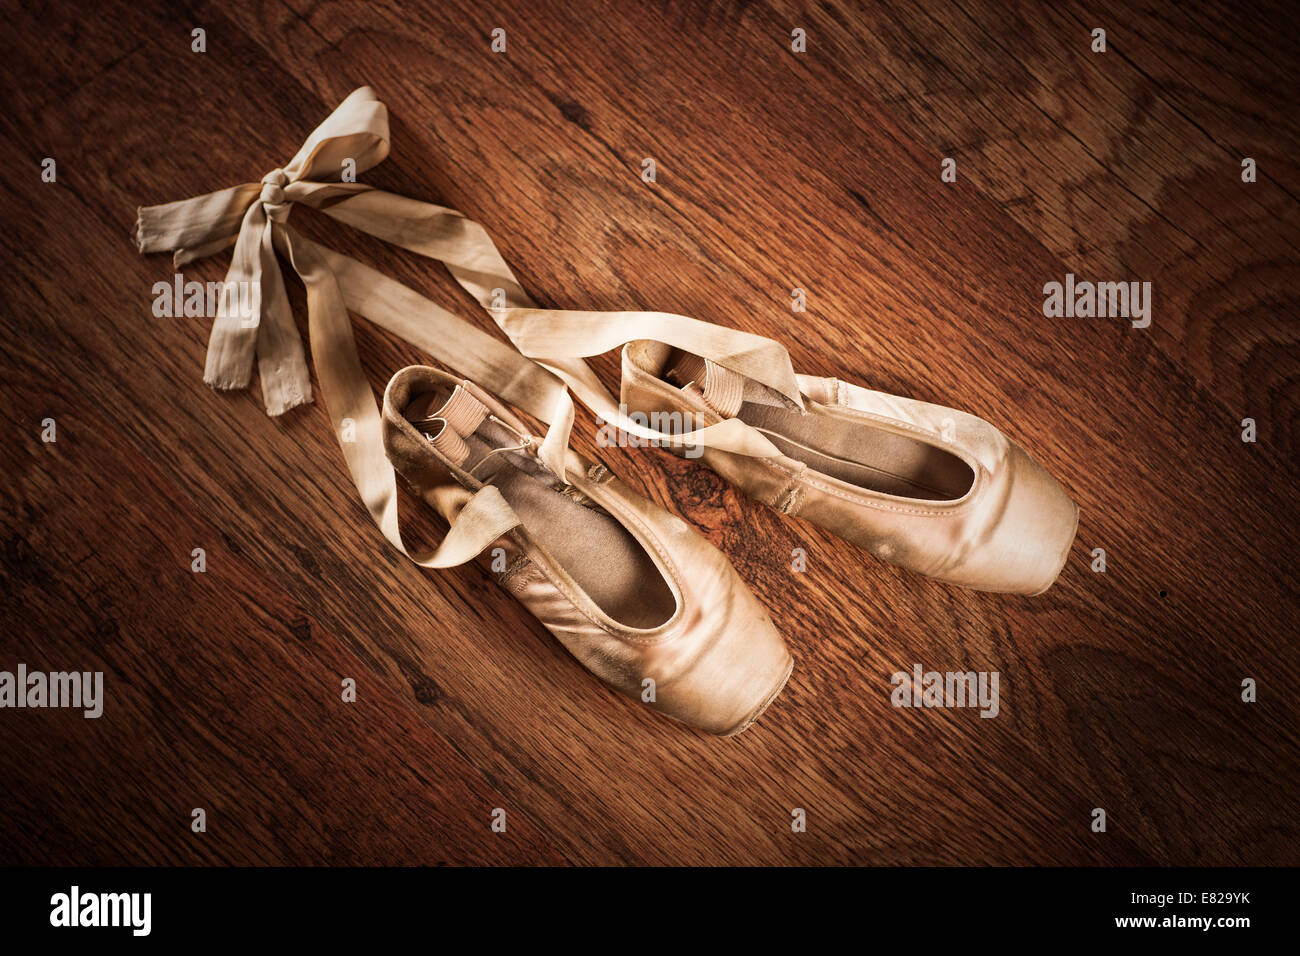 Pair of worn out ballet shoes on a wooden floor Stock Photo - Alamy